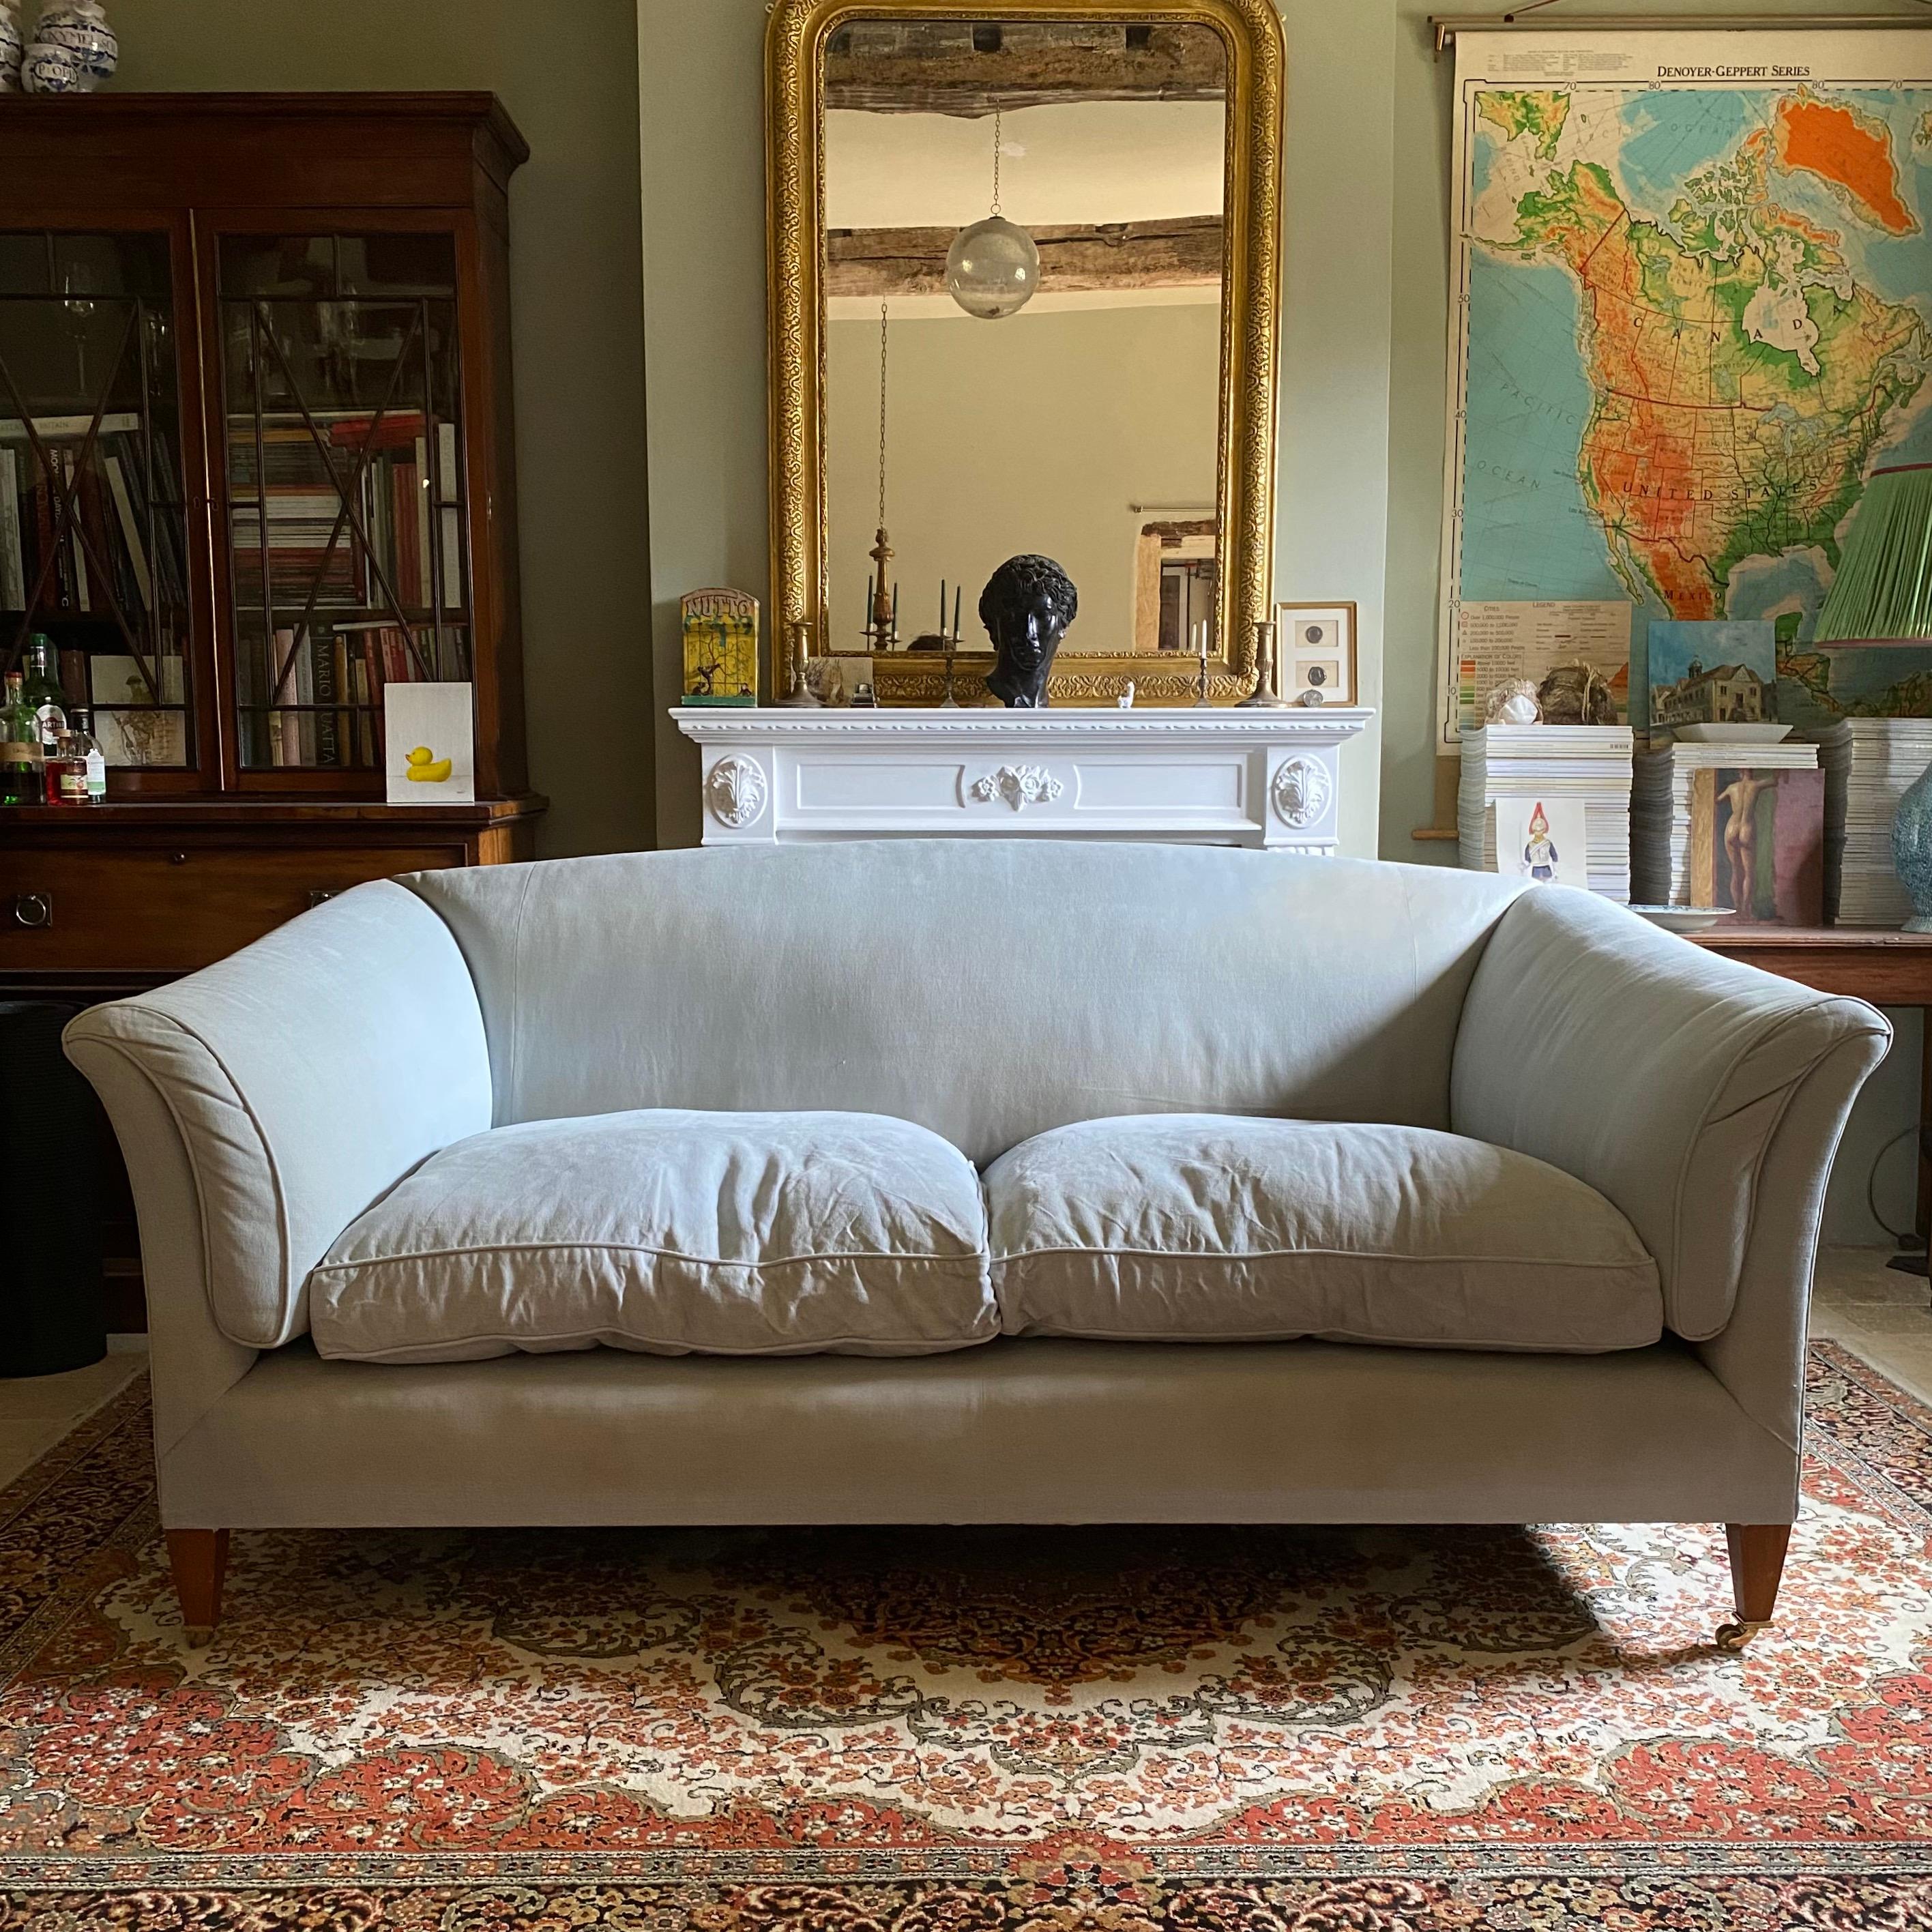 A fantastic huge scale Country House sofa - possibly an Abbey or Priory by Robert Kime. 

The sofa has been bespoke made with a beech frame and exposed legs that terminate in brass castors. It's been upholstered using Pret a Vivre fabric. The